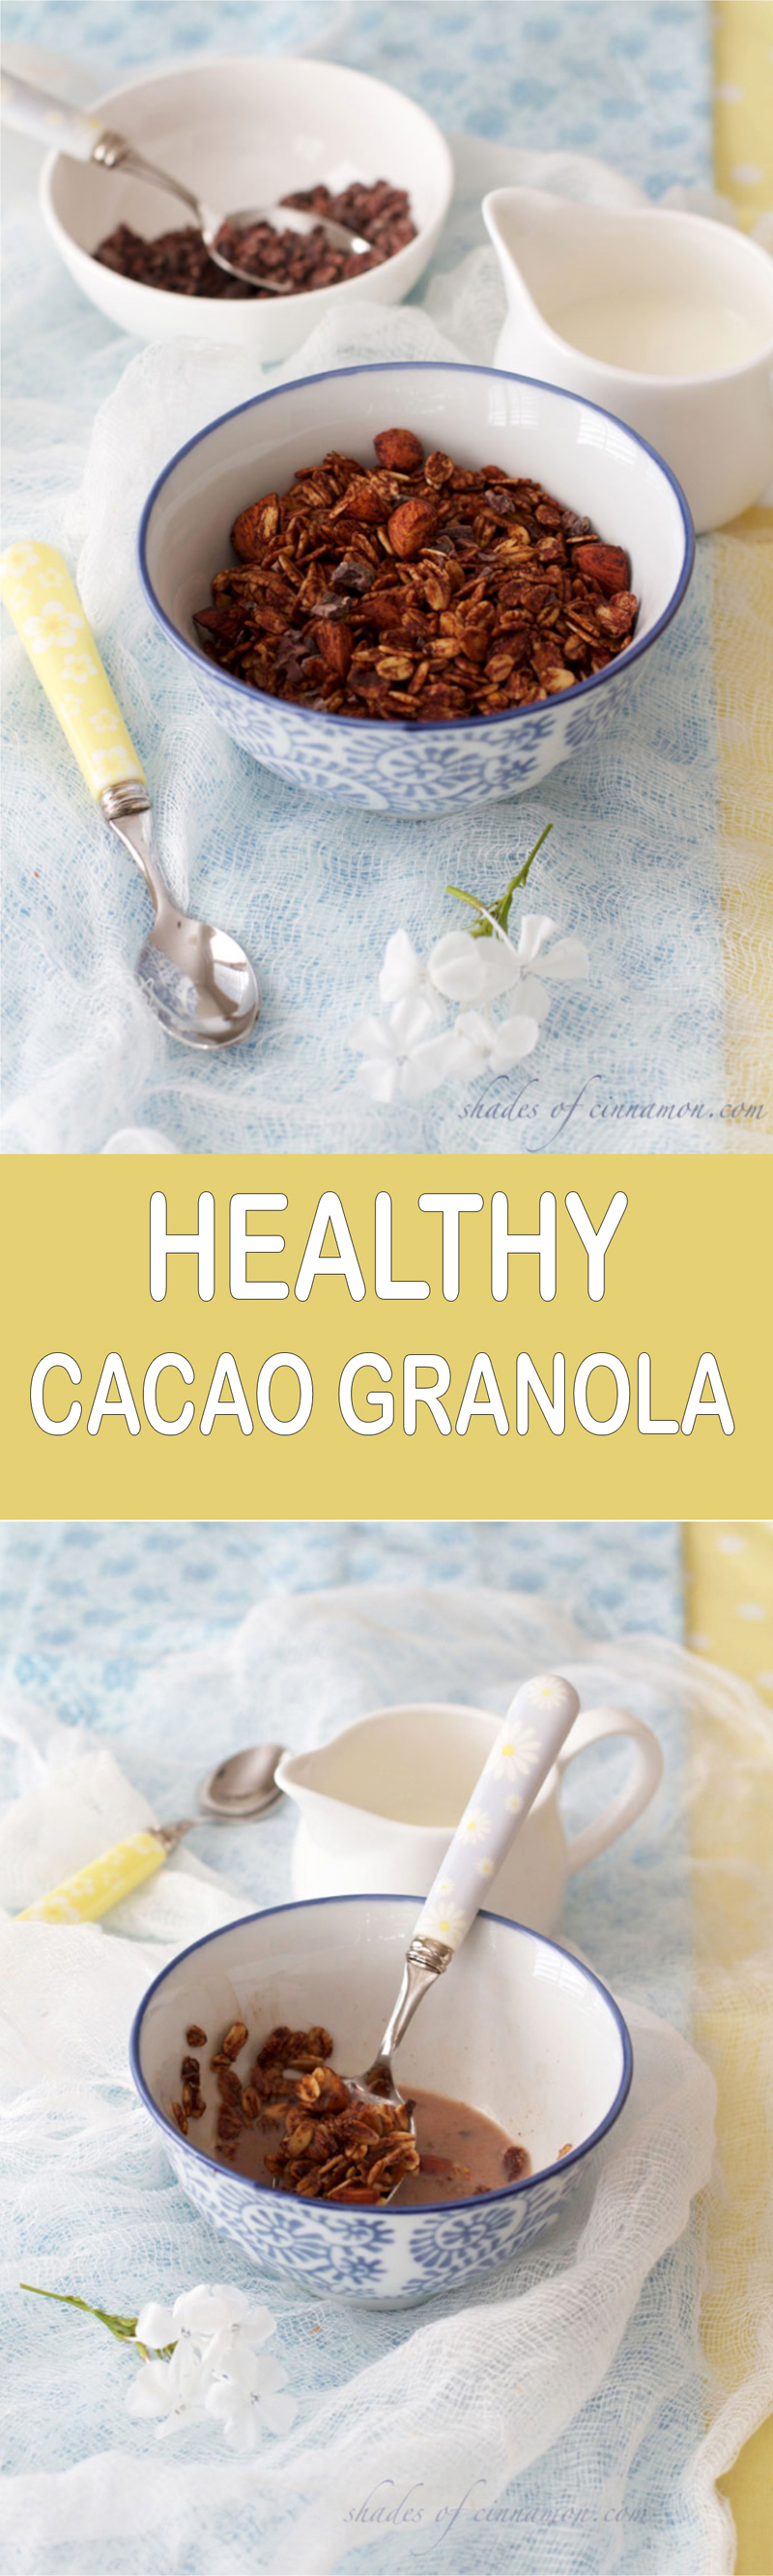 Healthy-Cacao-Granola-for-Pinterest